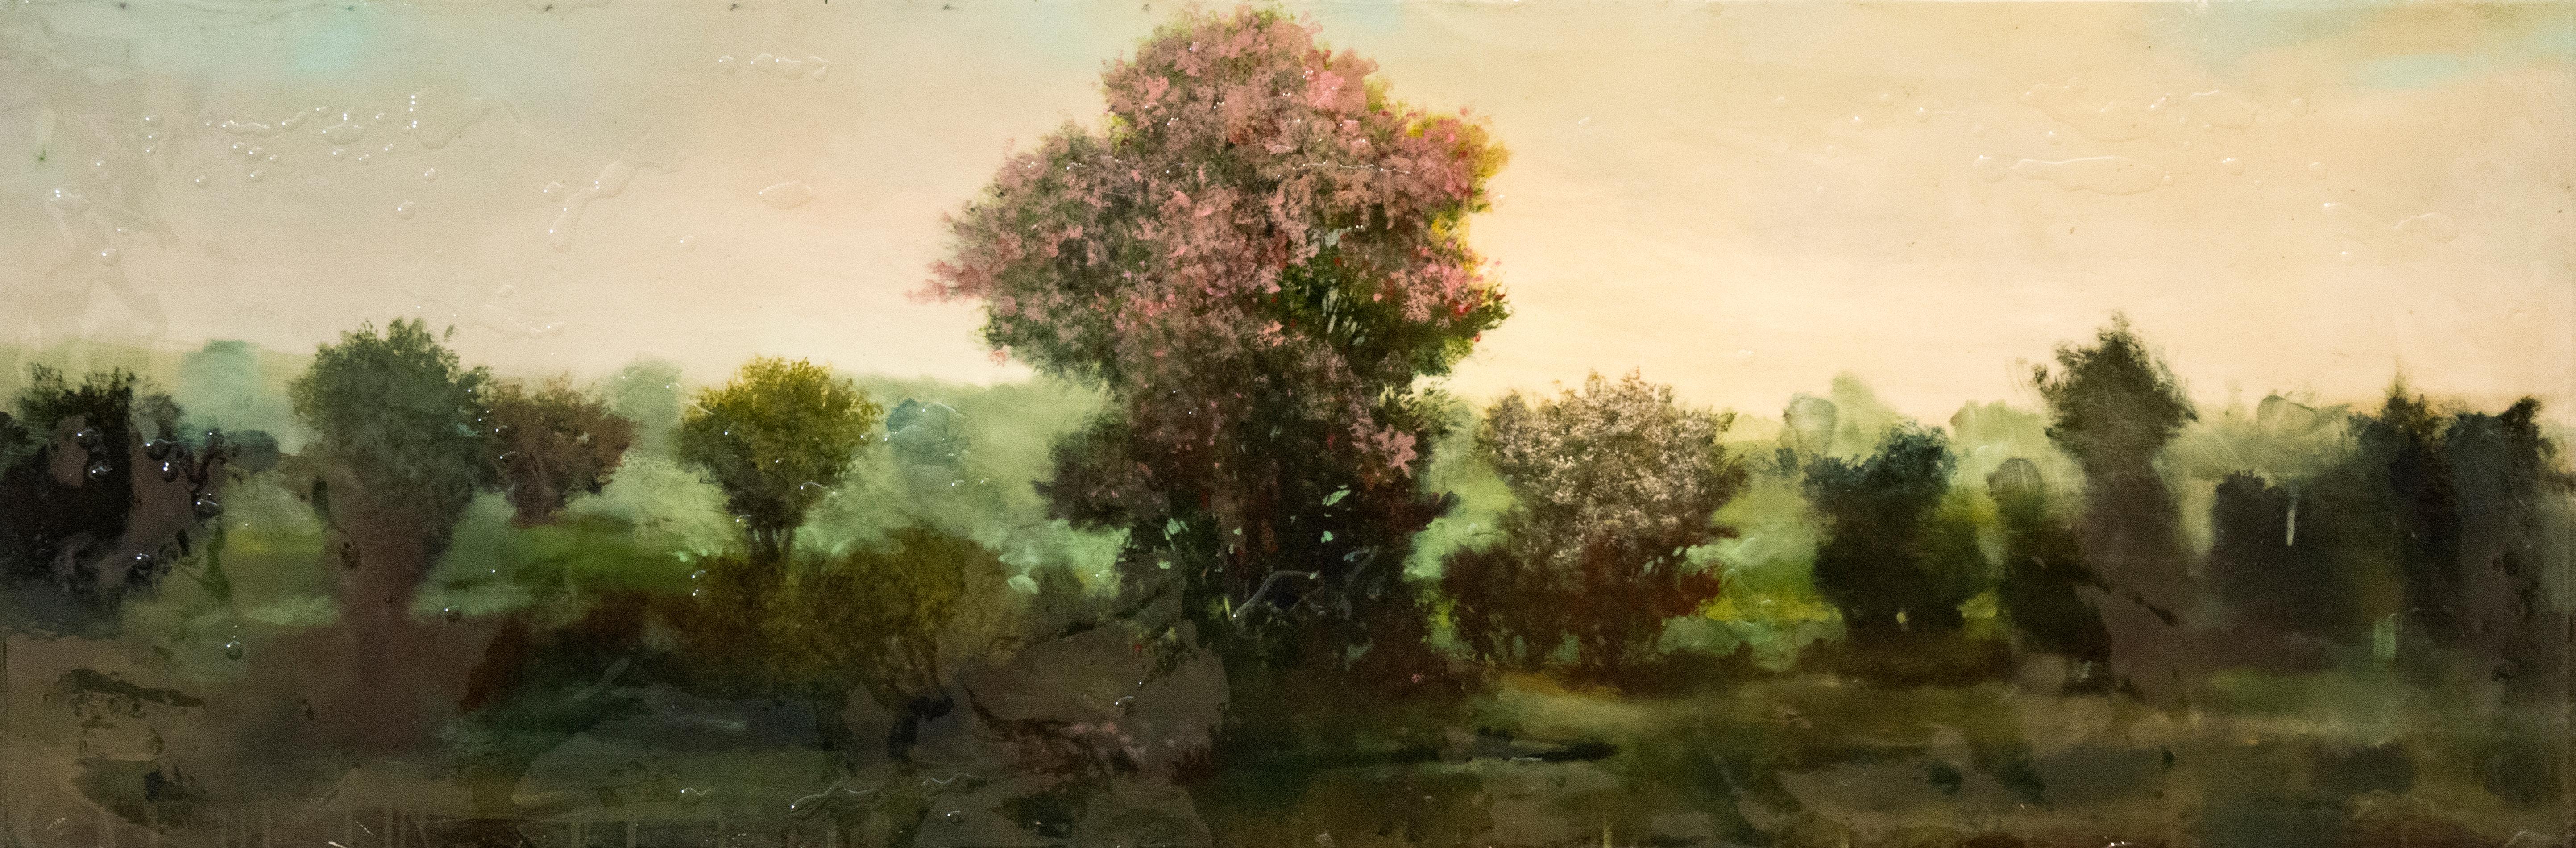 Peter Hoffer Landscape Painting - Azalea - soft, forest, landscape, contemporary, acrylic and resin on panel